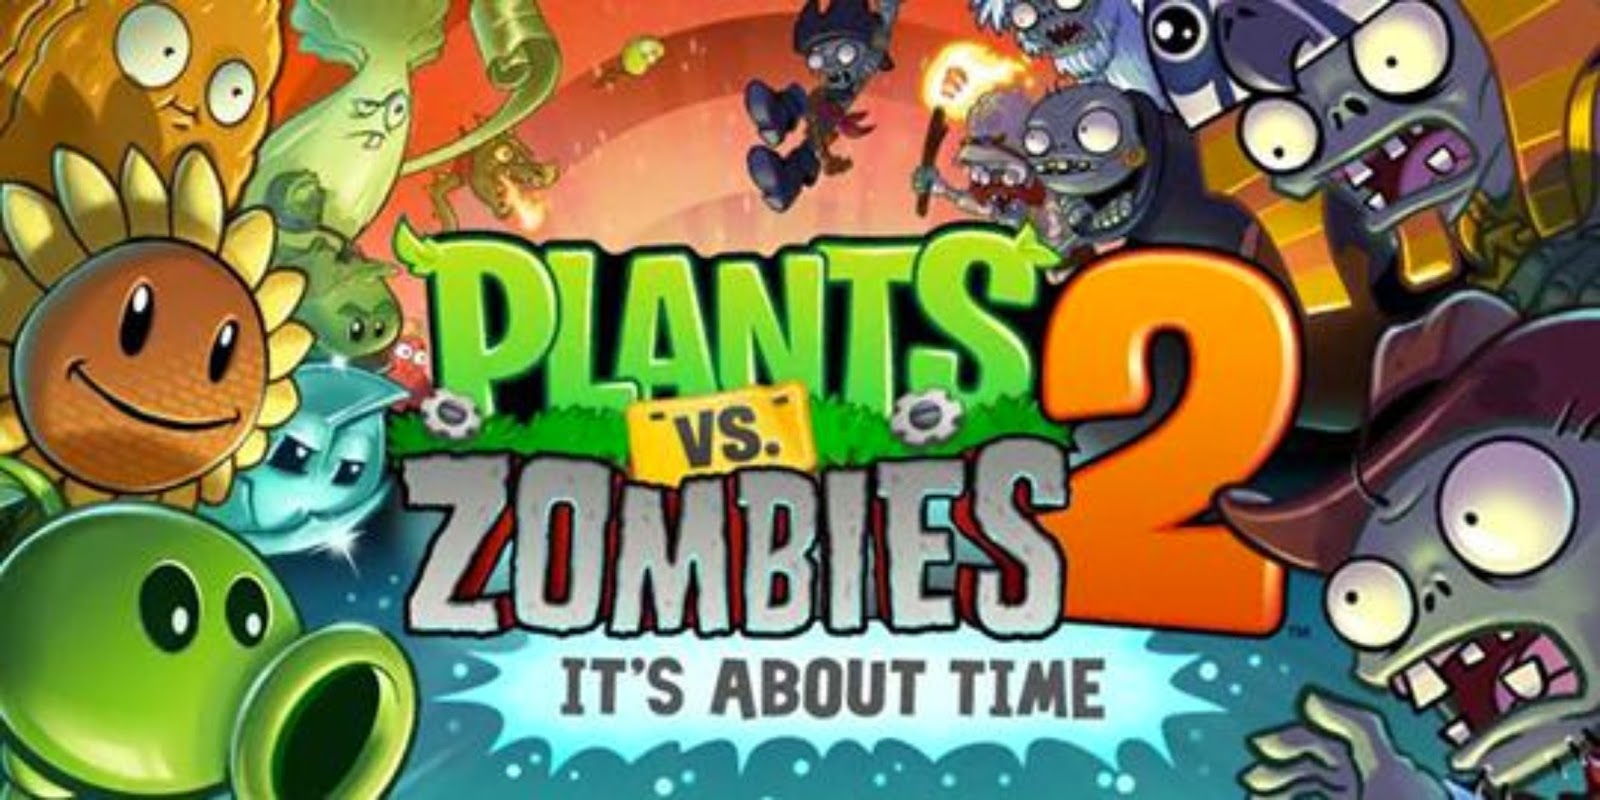 Plants vs. Zombies 2 Apk + Data Free Full Android